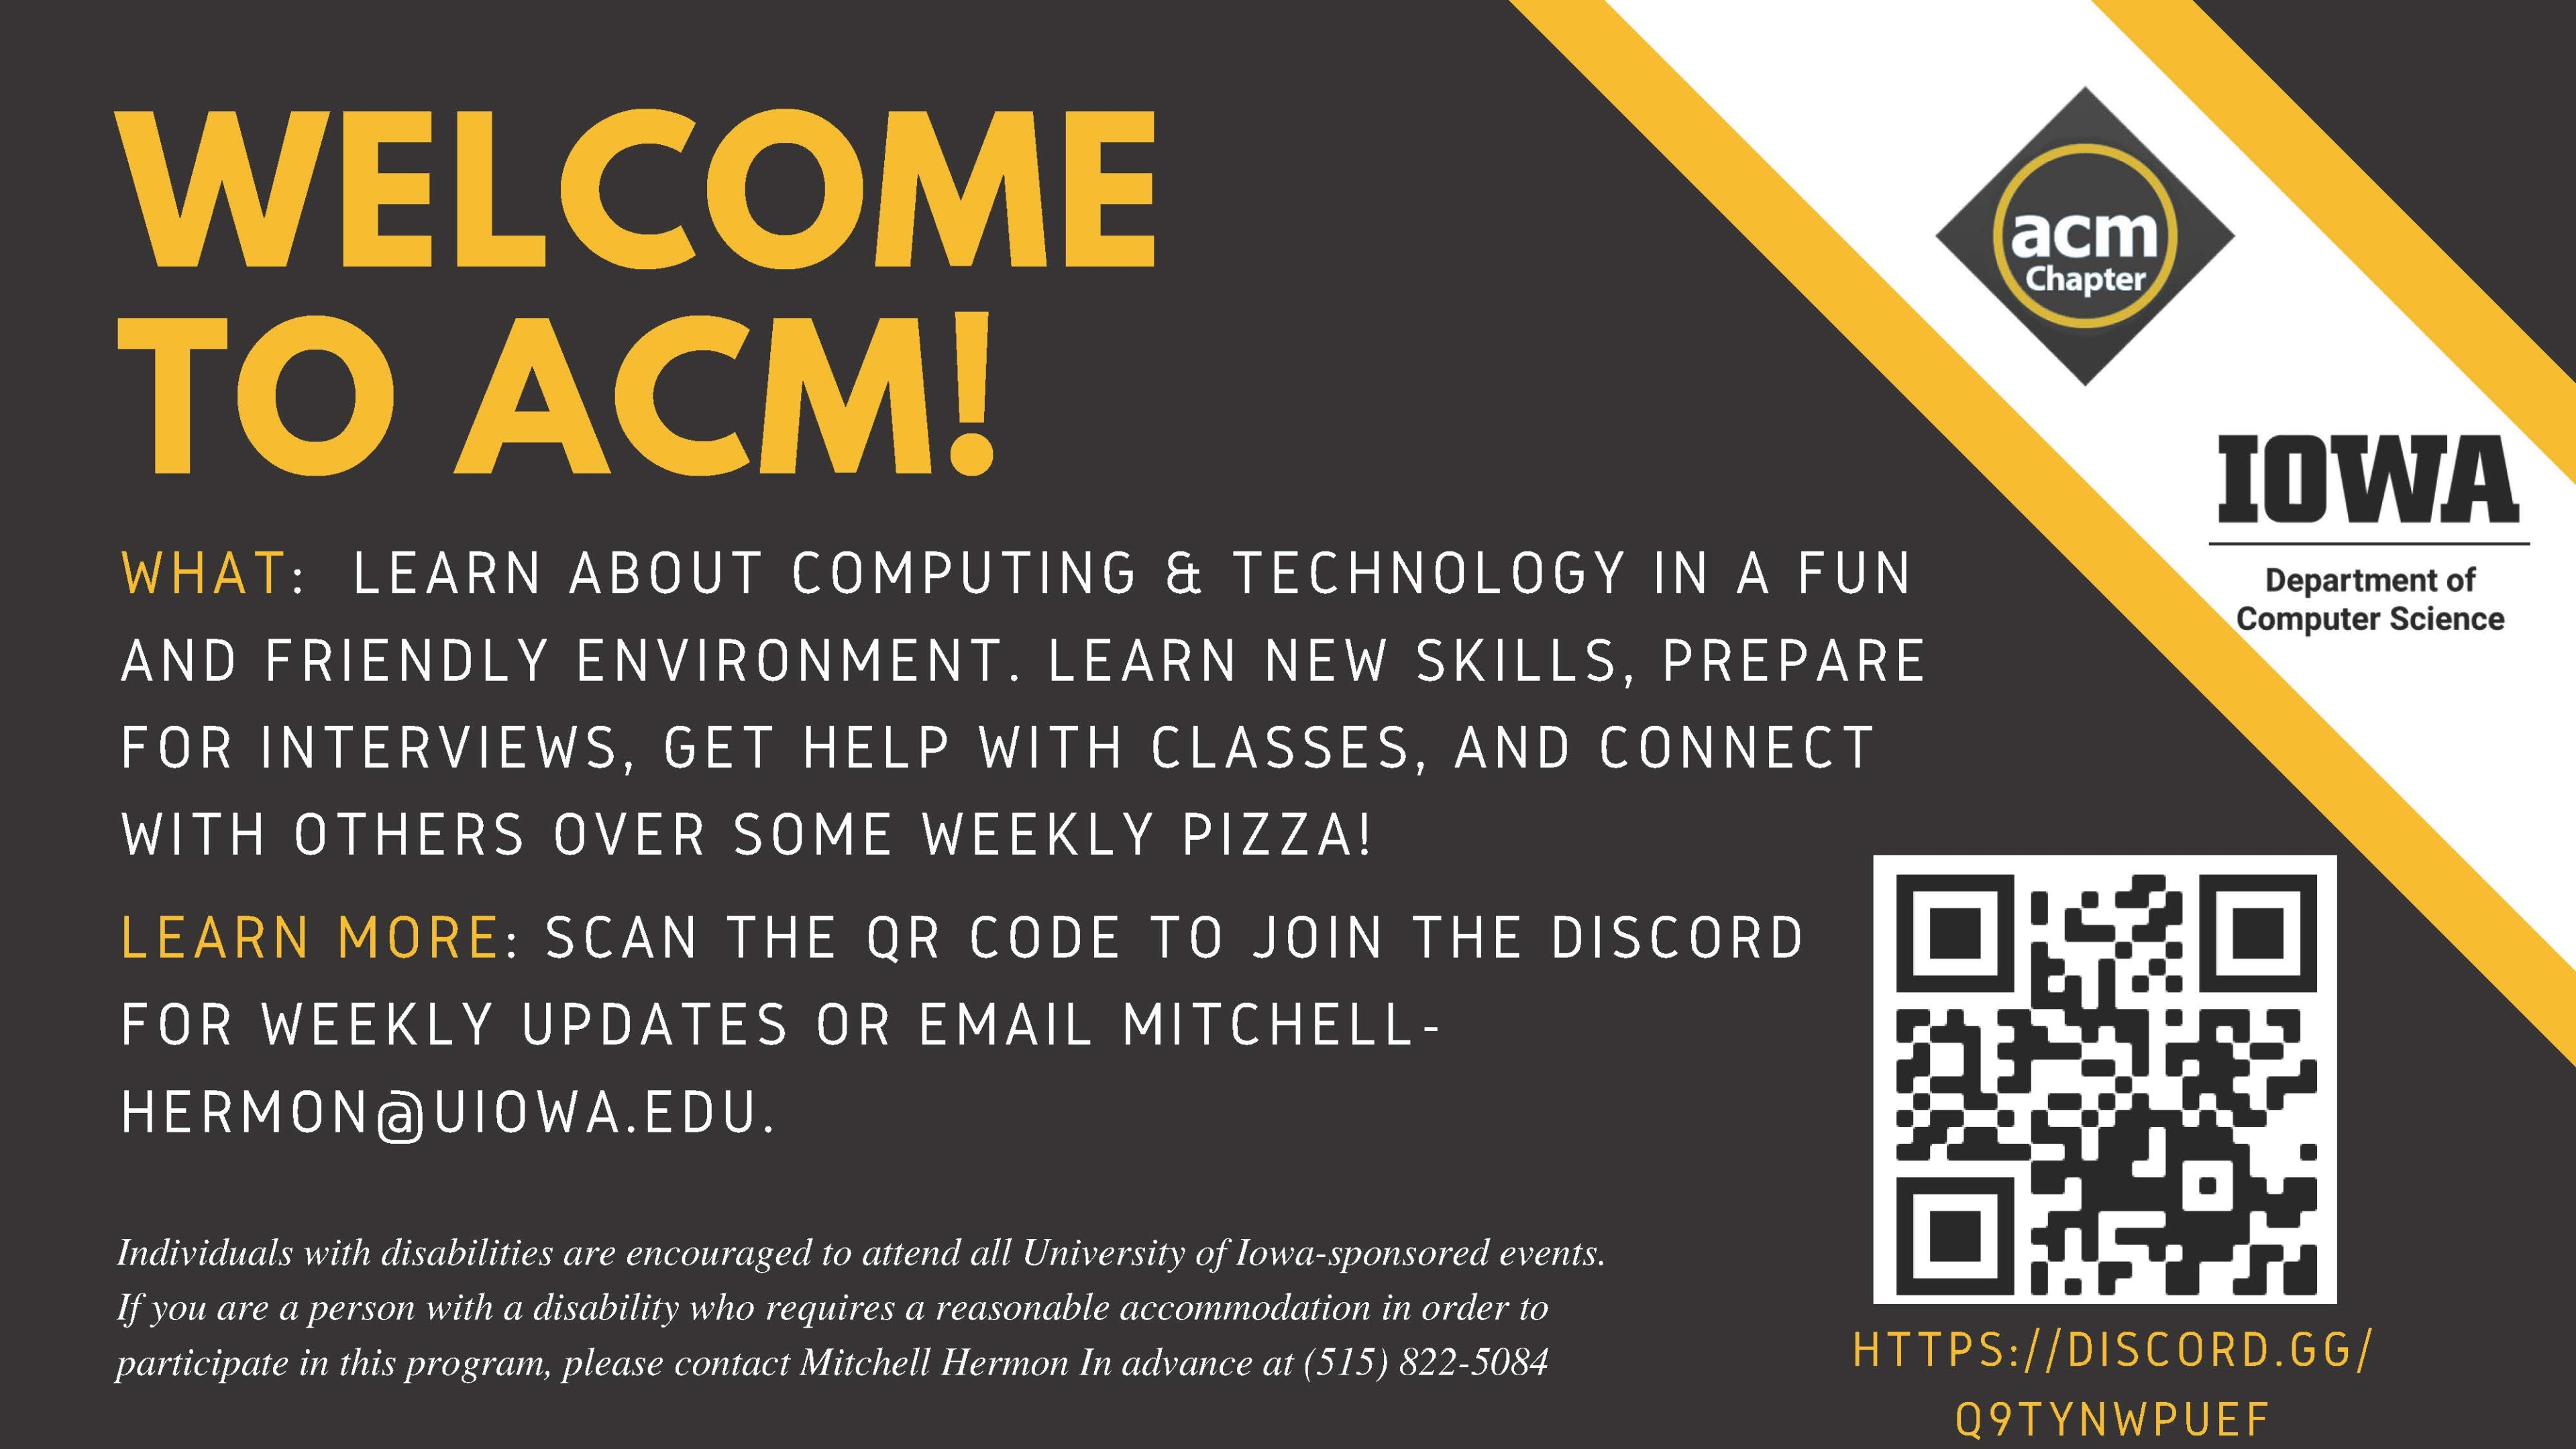 WELCOME TO ACM! Individuals with disabilities are encouraged to attend all University of Iowa-sponsored events. If you are a person with a disability who requires a reasonable accommodation in order to participate in this program, please contact Mitchell Hermon In advance at (515) 822-5084 HTTPS://DISCORD.GG/ Q9TYNWPUEF